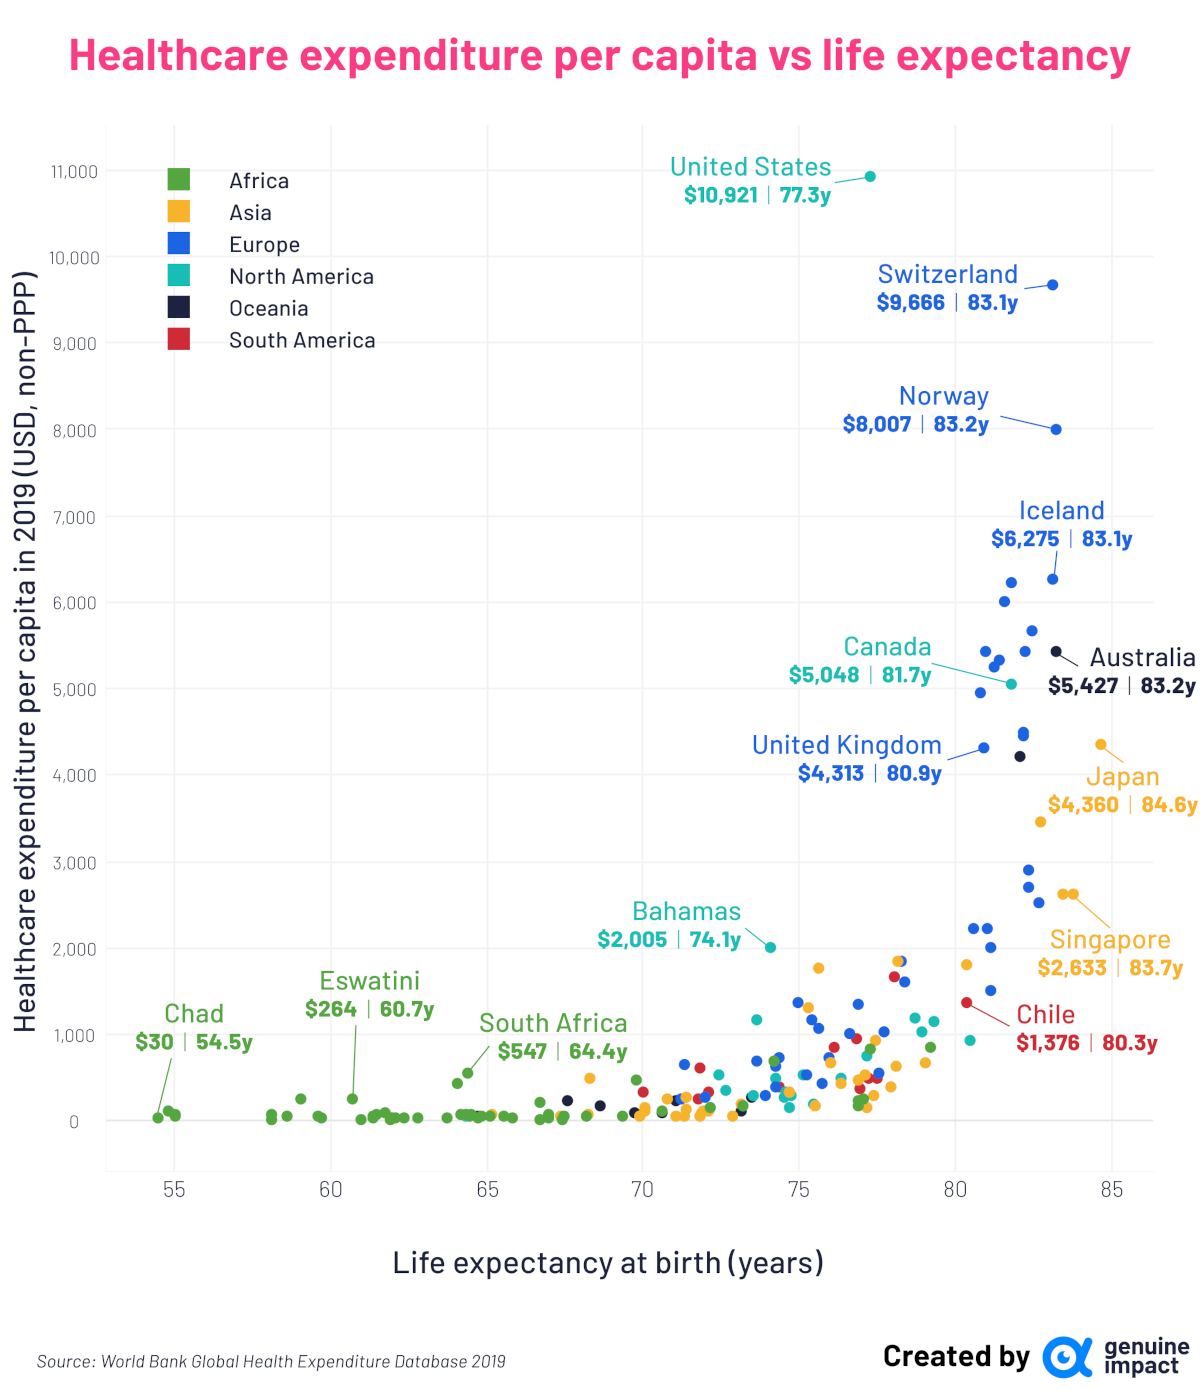 Analyzing 178 nations, higher healthcare spending relates to longer life, particularly up to 80 years.